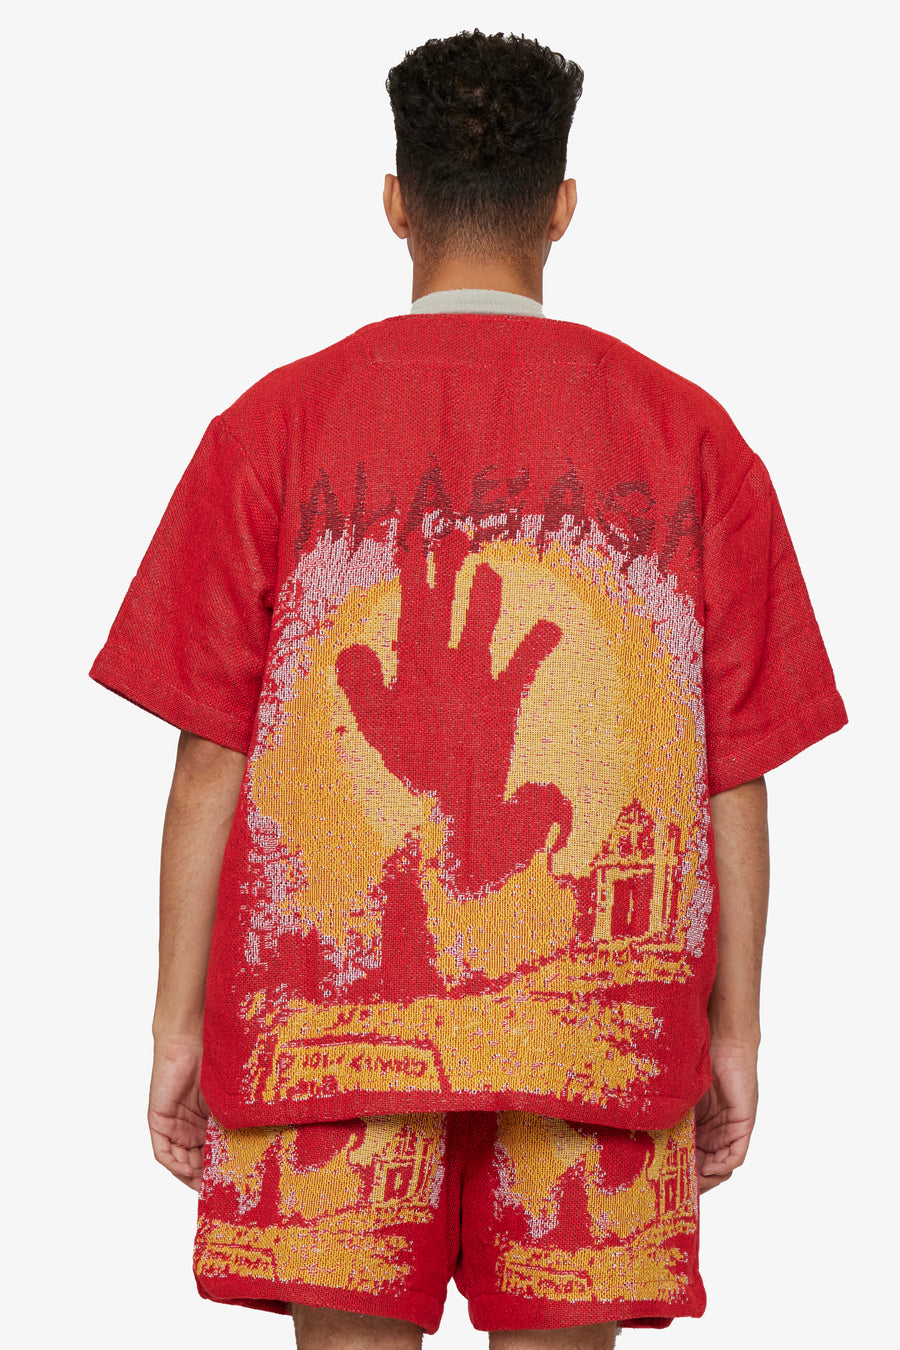 VALABASAS TAPESTRY BUTTON UP "GHOST HAND" RED